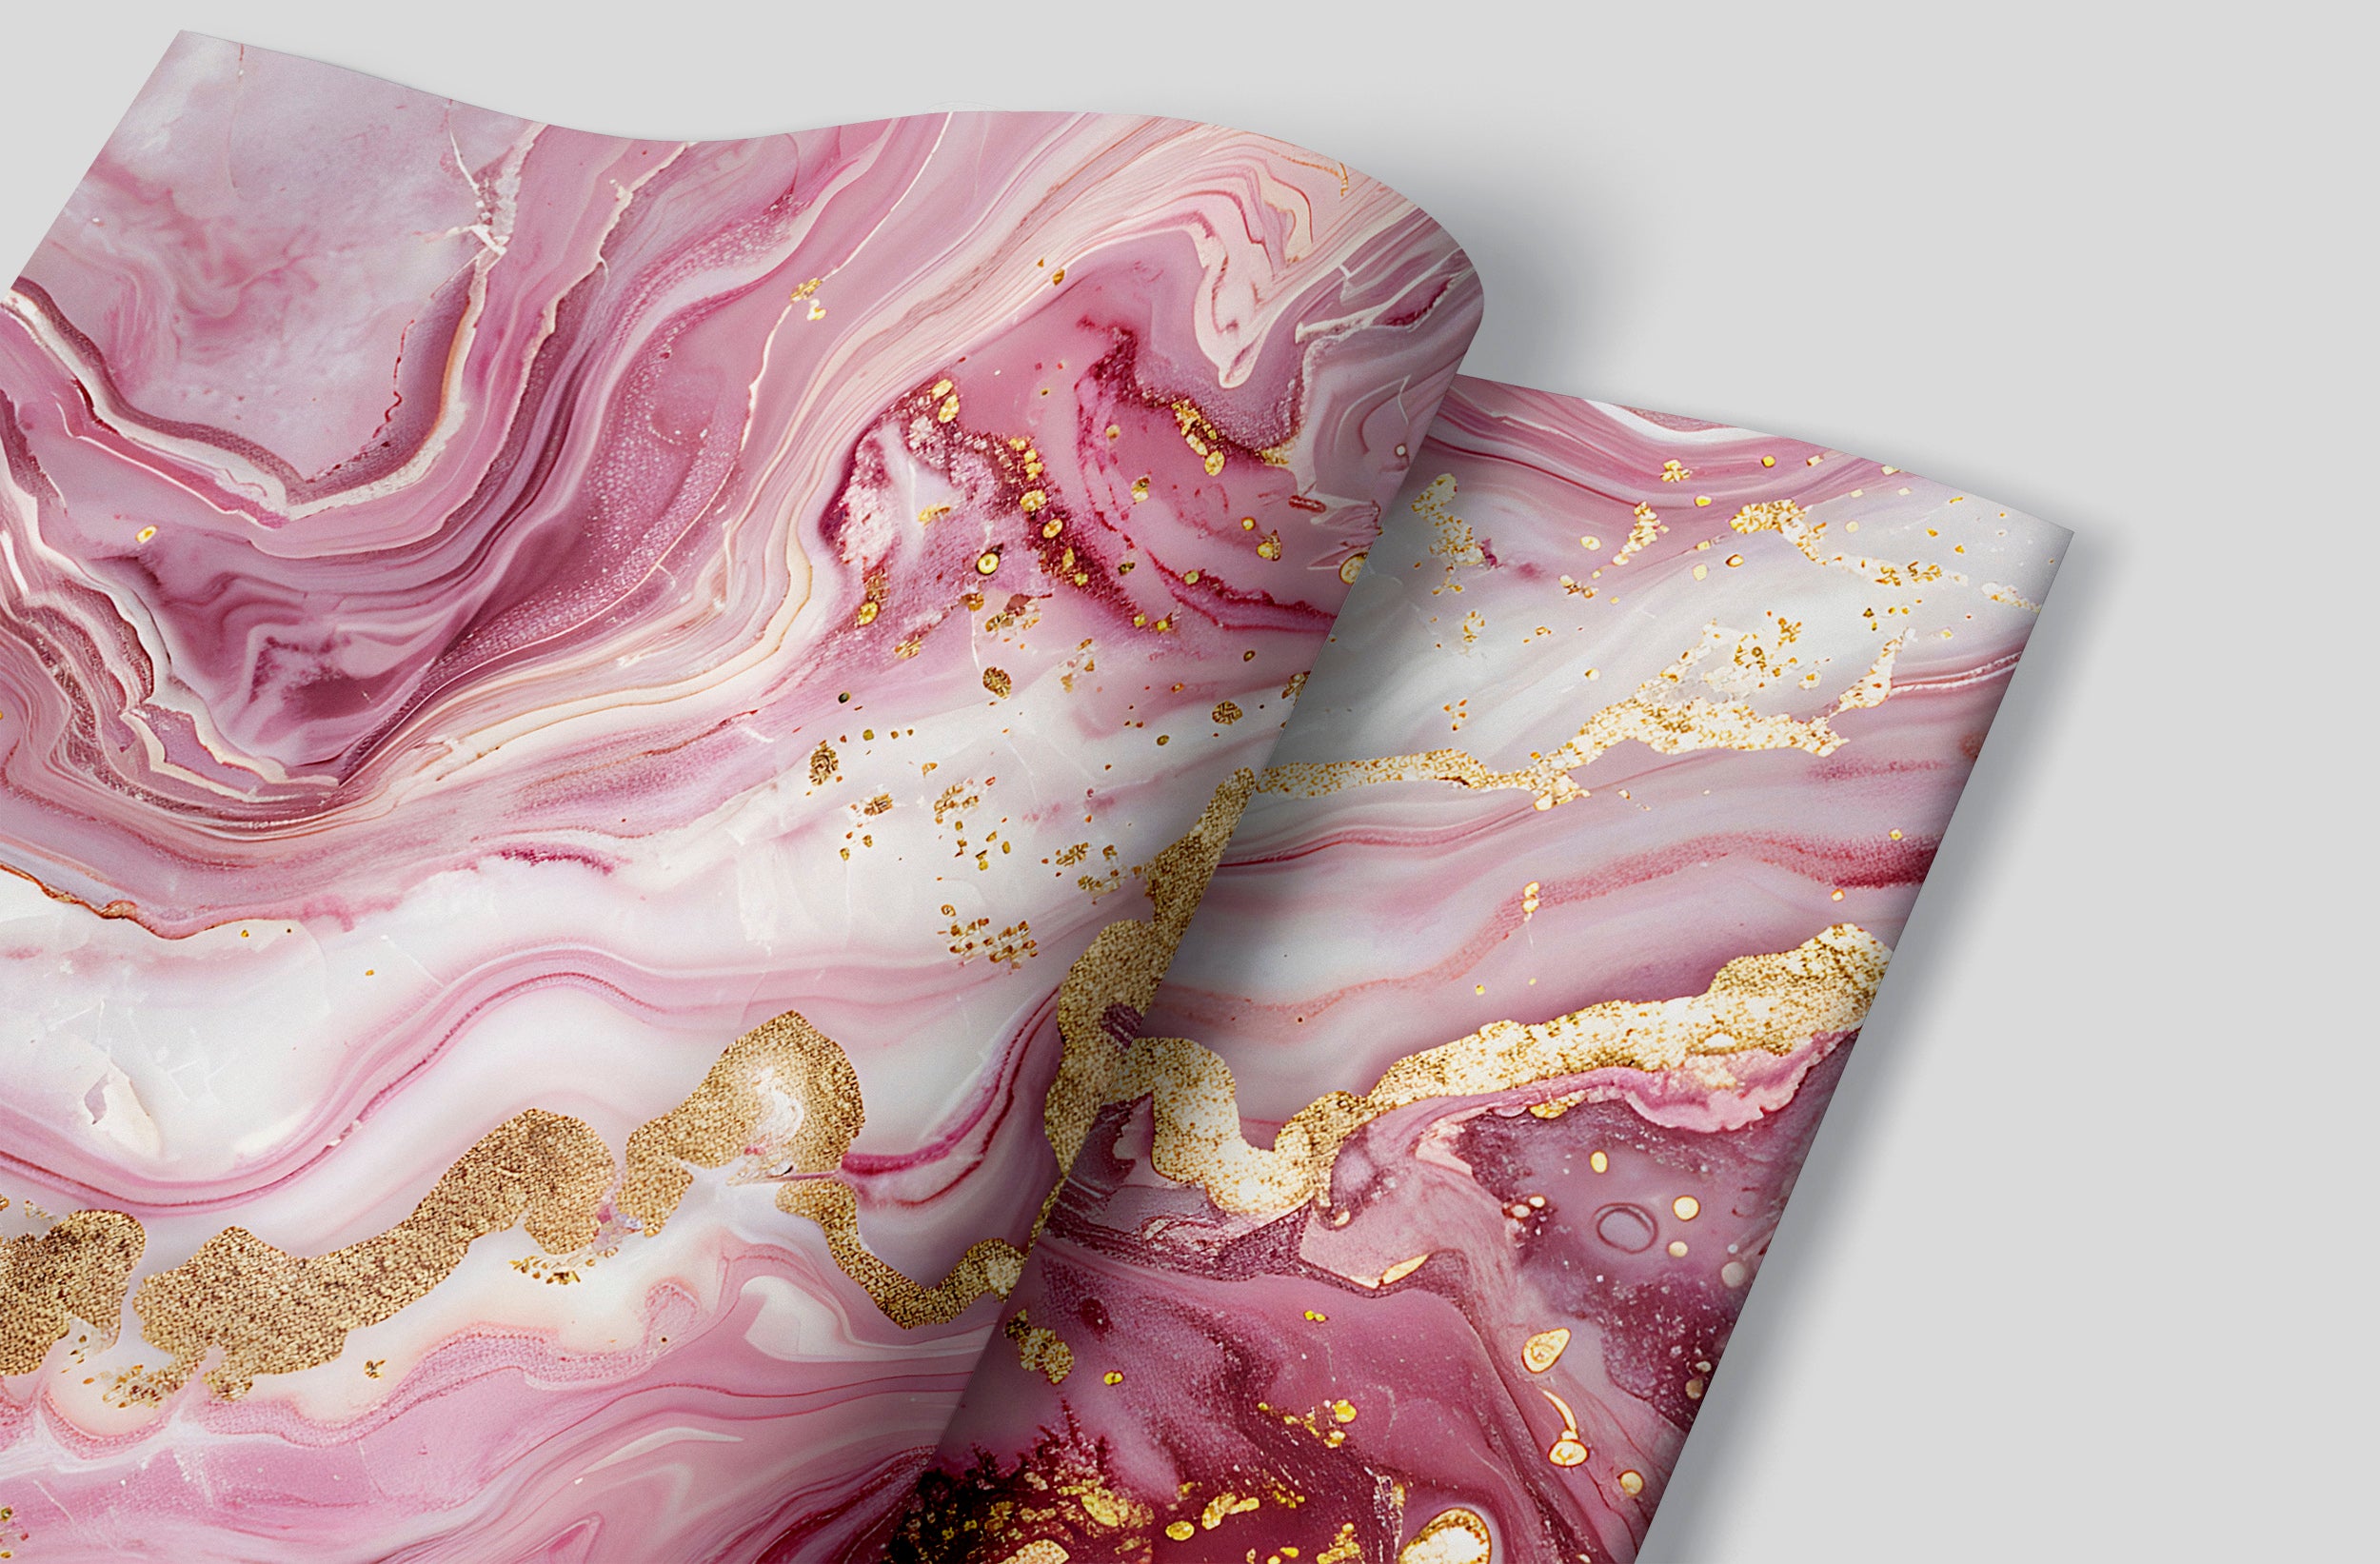 Pink and Gold Alcohol Ink Mural, Peel and Stick Abstract Wallpaper, Removable Modern Marble Texture Wall Decor, Unique Accent Wallpaper